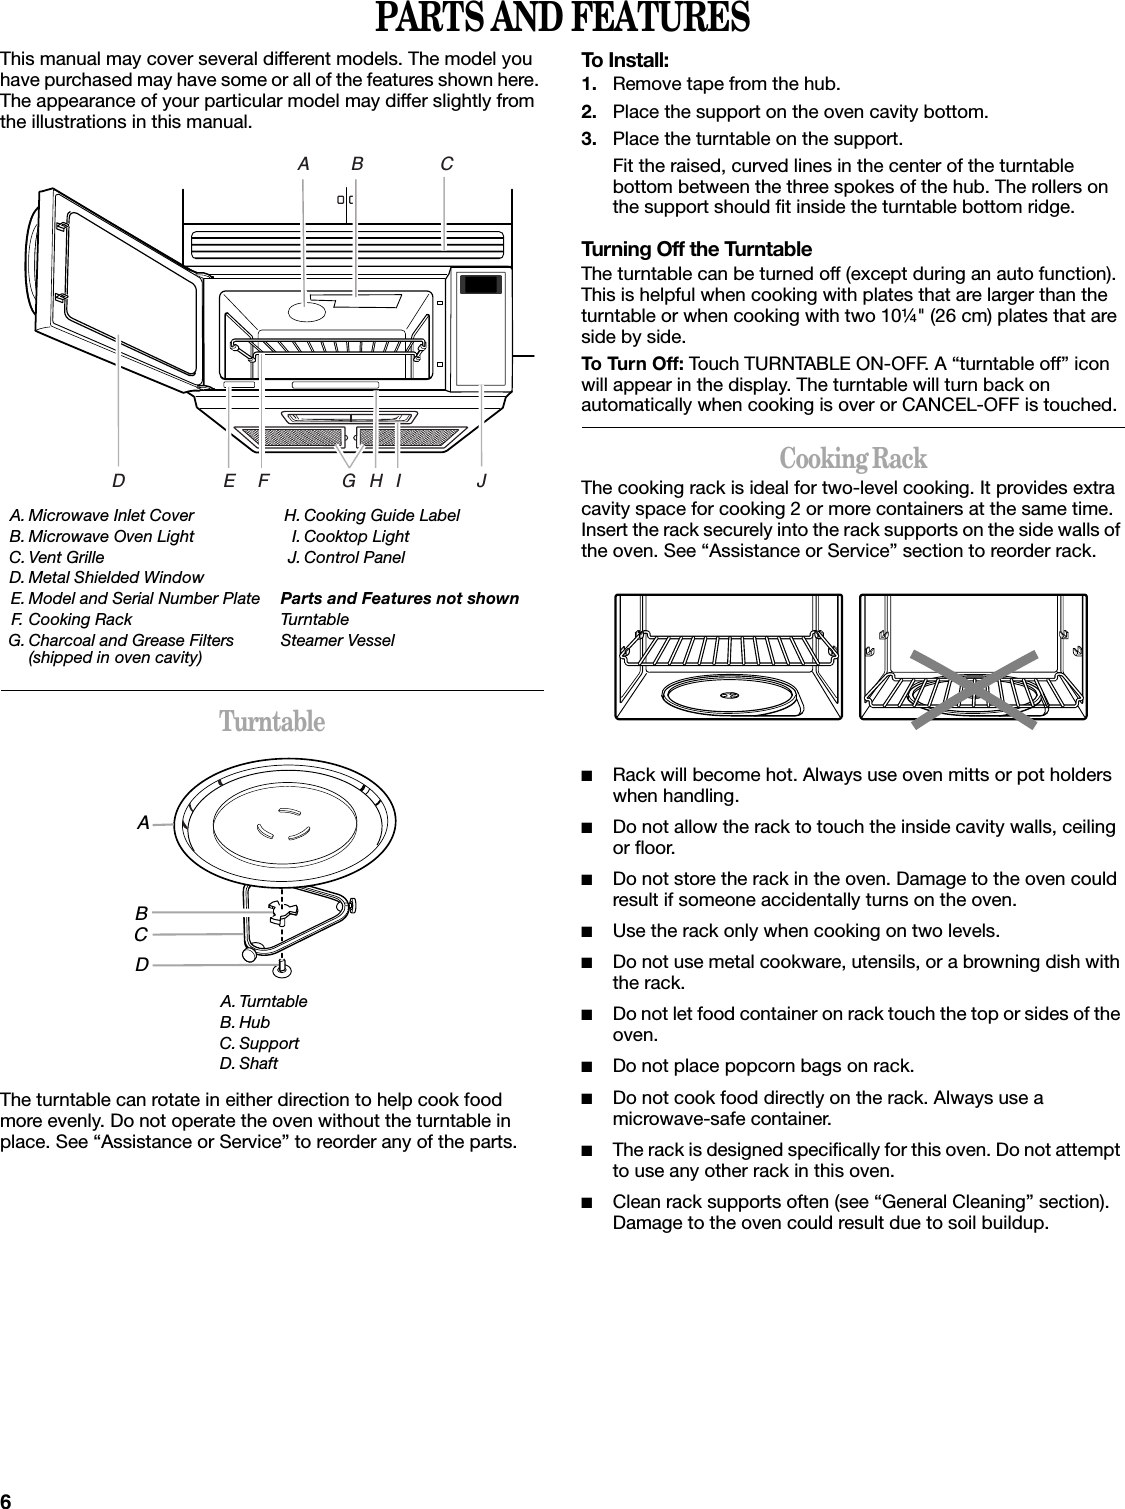 6PARTS AND FEATURESThis manual may cover several different models. The model you have purchased may have some or all of the features shown here. The appearance of your particular model may differ slightly from the illustrations in this manual.TurntableThe turntable can rotate in either direction to help cook food more evenly. Do not operate the oven without the turntable in place. See “Assistance or Service” to reorder any of the parts.To Install:1. Remove tape from the hub.2. Place the support on the oven cavity bottom.3. Place the turntable on the support.Fit the raised, curved lines in the center of the turntable bottom between the three spokes of the hub. The rollers on the support should fit inside the turntable bottom ridge.Turning Off the TurntableThe turntable can be turned off (except during an auto function). This is helpful when cooking with plates that are larger than the turntable or when cooking with two 10¼&quot; (26 cm) plates that are side by side.To Turn Off: Touch TURNTABLE ON-OFF. A “turntable off” icon will appear in the display. The turntable will turn back on automatically when cooking is over or CANCEL-OFF is touched.Cooking RackThe cooking rack is ideal for two-level cooking. It provides extra cavity space for cooking 2 or more containers at the same time. Insert the rack securely into the rack supports on the side walls of the oven. See “Assistance or Service” section to reorder rack.■Rack will become hot. Always use oven mitts or pot holders when handling.■Do not allow the rack to touch the inside cavity walls, ceiling or floor.■Do not store the rack in the oven. Damage to the oven could result if someone accidentally turns on the oven.■Use the rack only when cooking on two levels.■Do not use metal cookware, utensils, or a browning dish with the rack.■Do not let food container on rack touch the top or sides of the oven.■Do not place popcorn bags on rack.■Do not cook food directly on the rack. Always use a microwave-safe container.■The rack is designed specifically for this oven. Do not attempt to use any other rack in this oven.■Clean rack supports often (see “General Cleaning” section). Damage to the oven could result due to soil buildup.A. Microwave Inlet CoverB. Microwave Oven LightC. Vent GrilleD. Metal Shielded WindowE. Model and Serial Number PlateF. Cooking RackG. Charcoal and Grease Filters (shipped in oven cavity)H. Cooking Guide LabelI. Cooktop LightJ. Control PanelParts and Features not shownTurntableSteamer VesselA. TurntableB. HubC. SupportD. ShaftABCGFD JIHEABCD